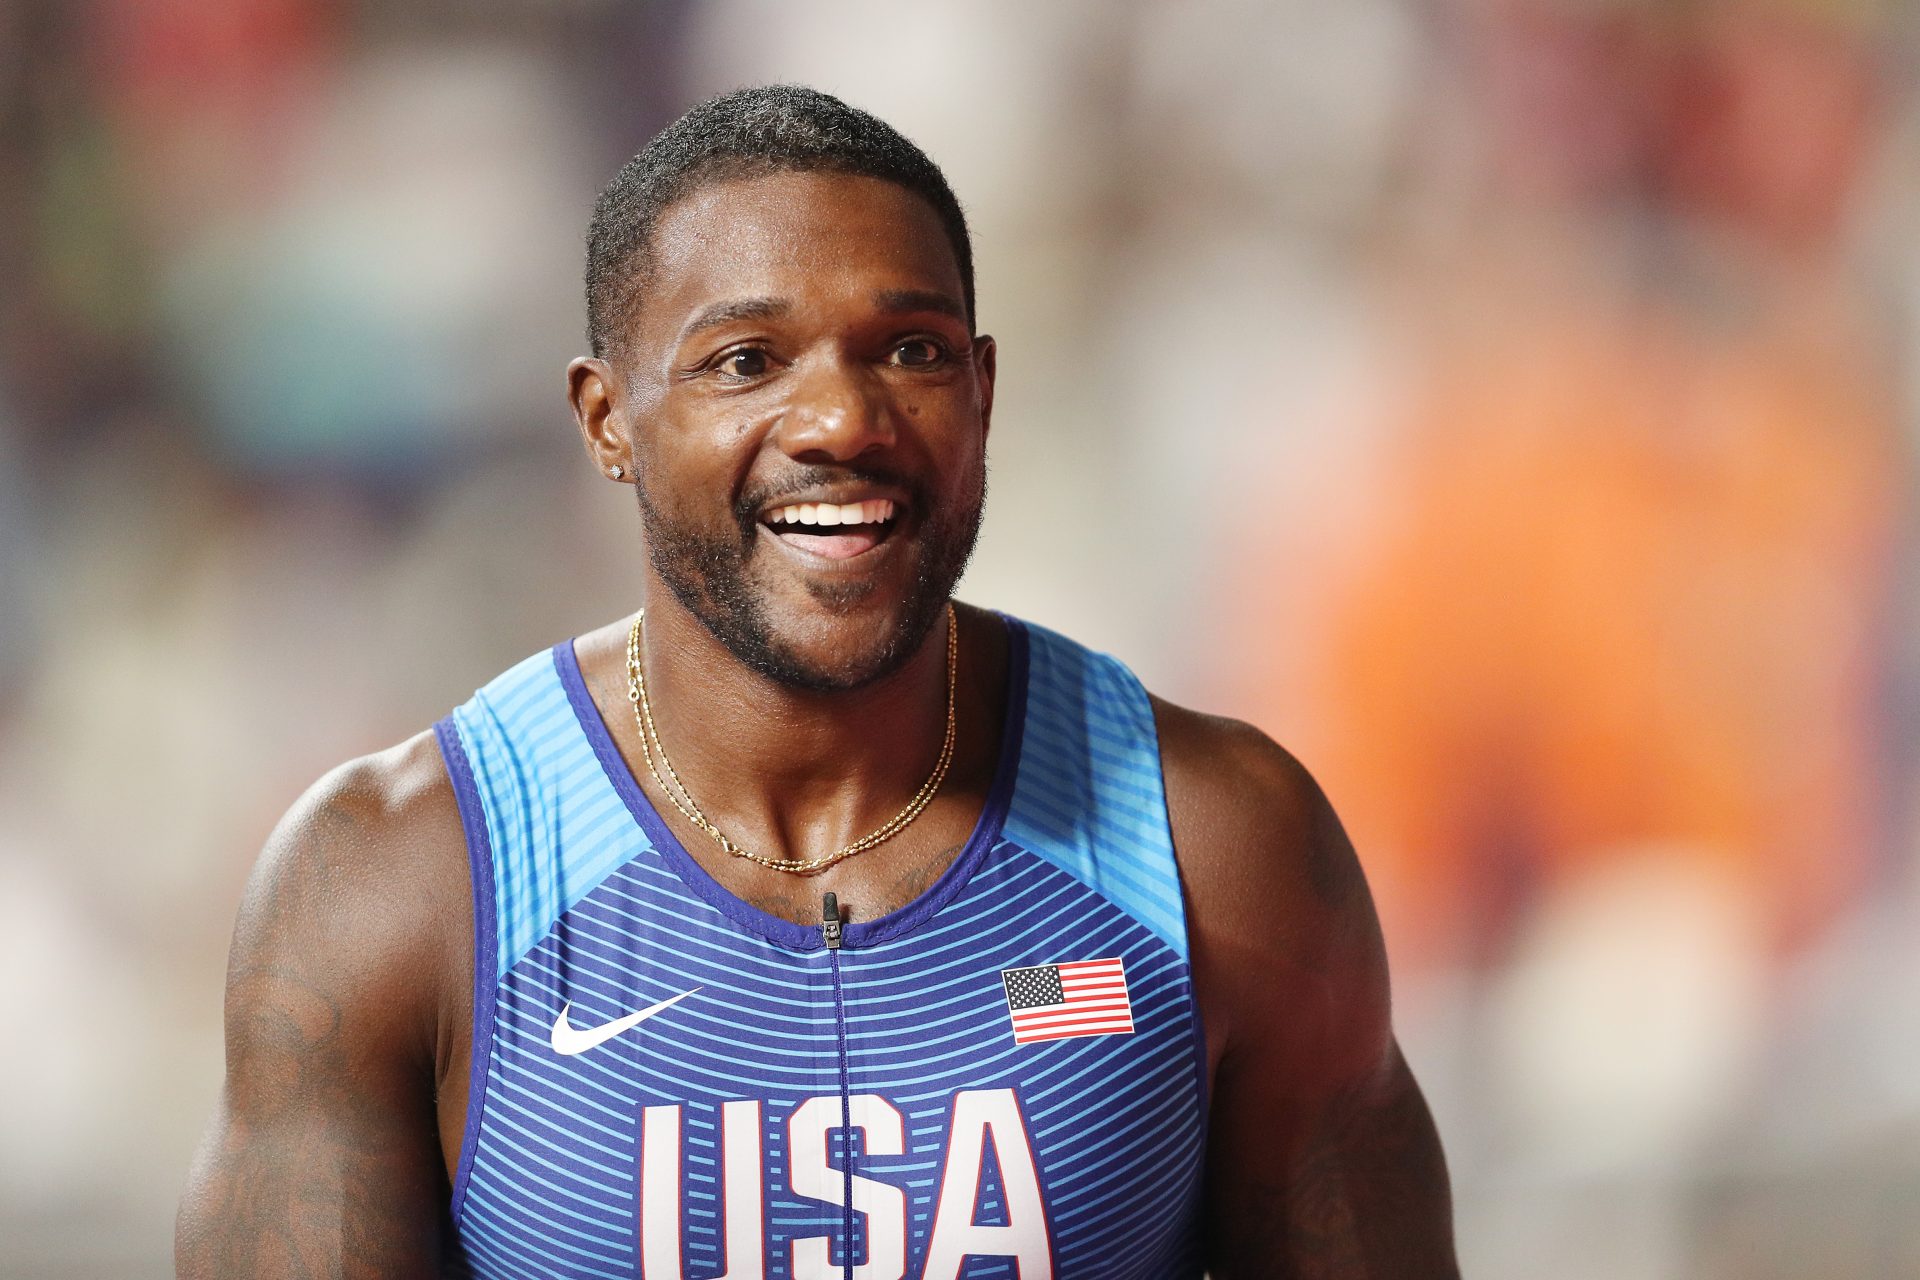 From heaven to hell: Justin Gatlin, one of the fastest men of all time